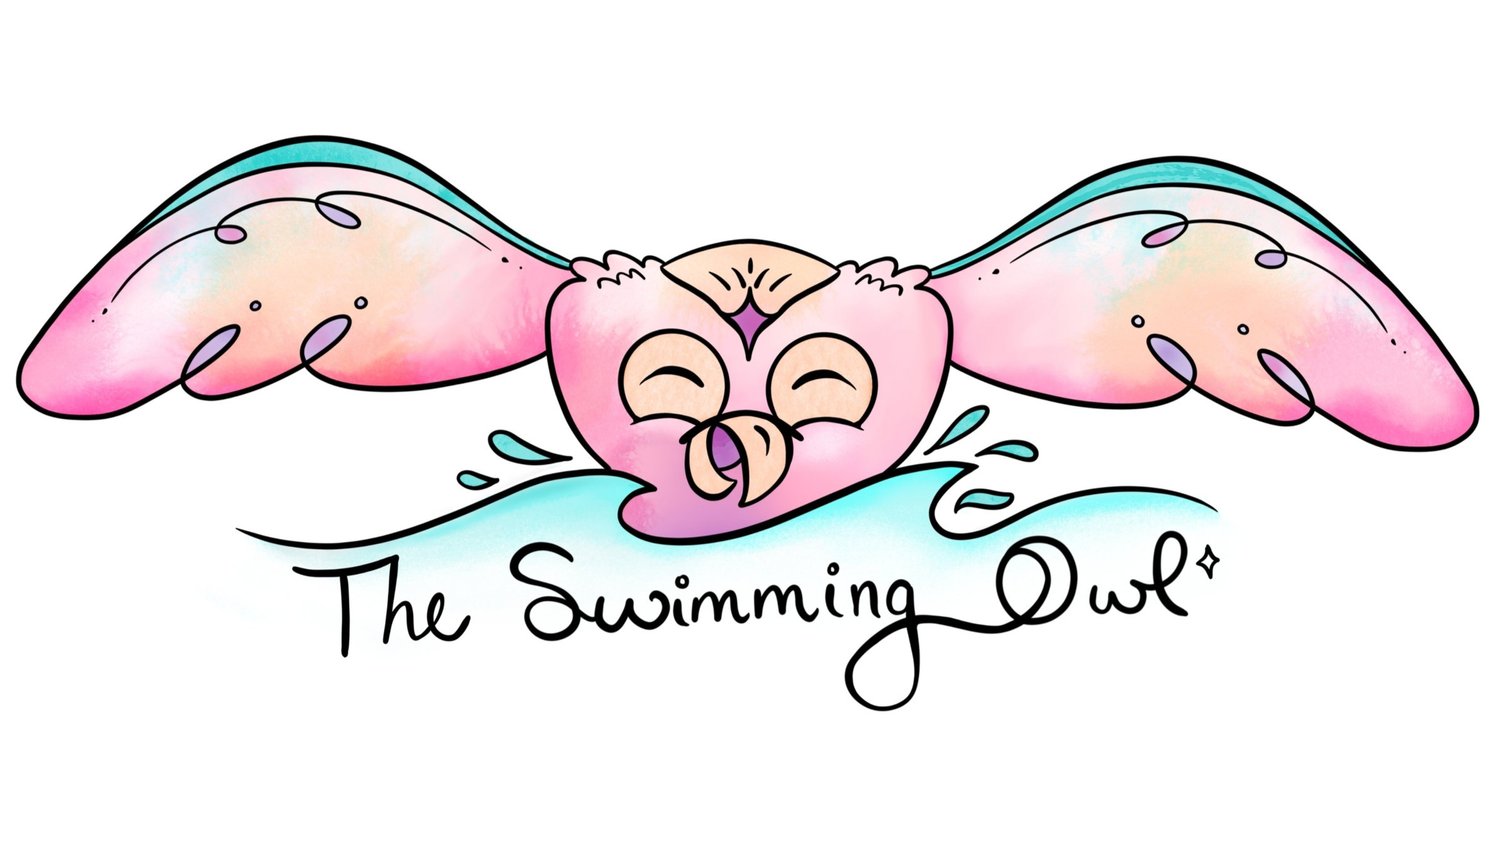 The Swimming Owl